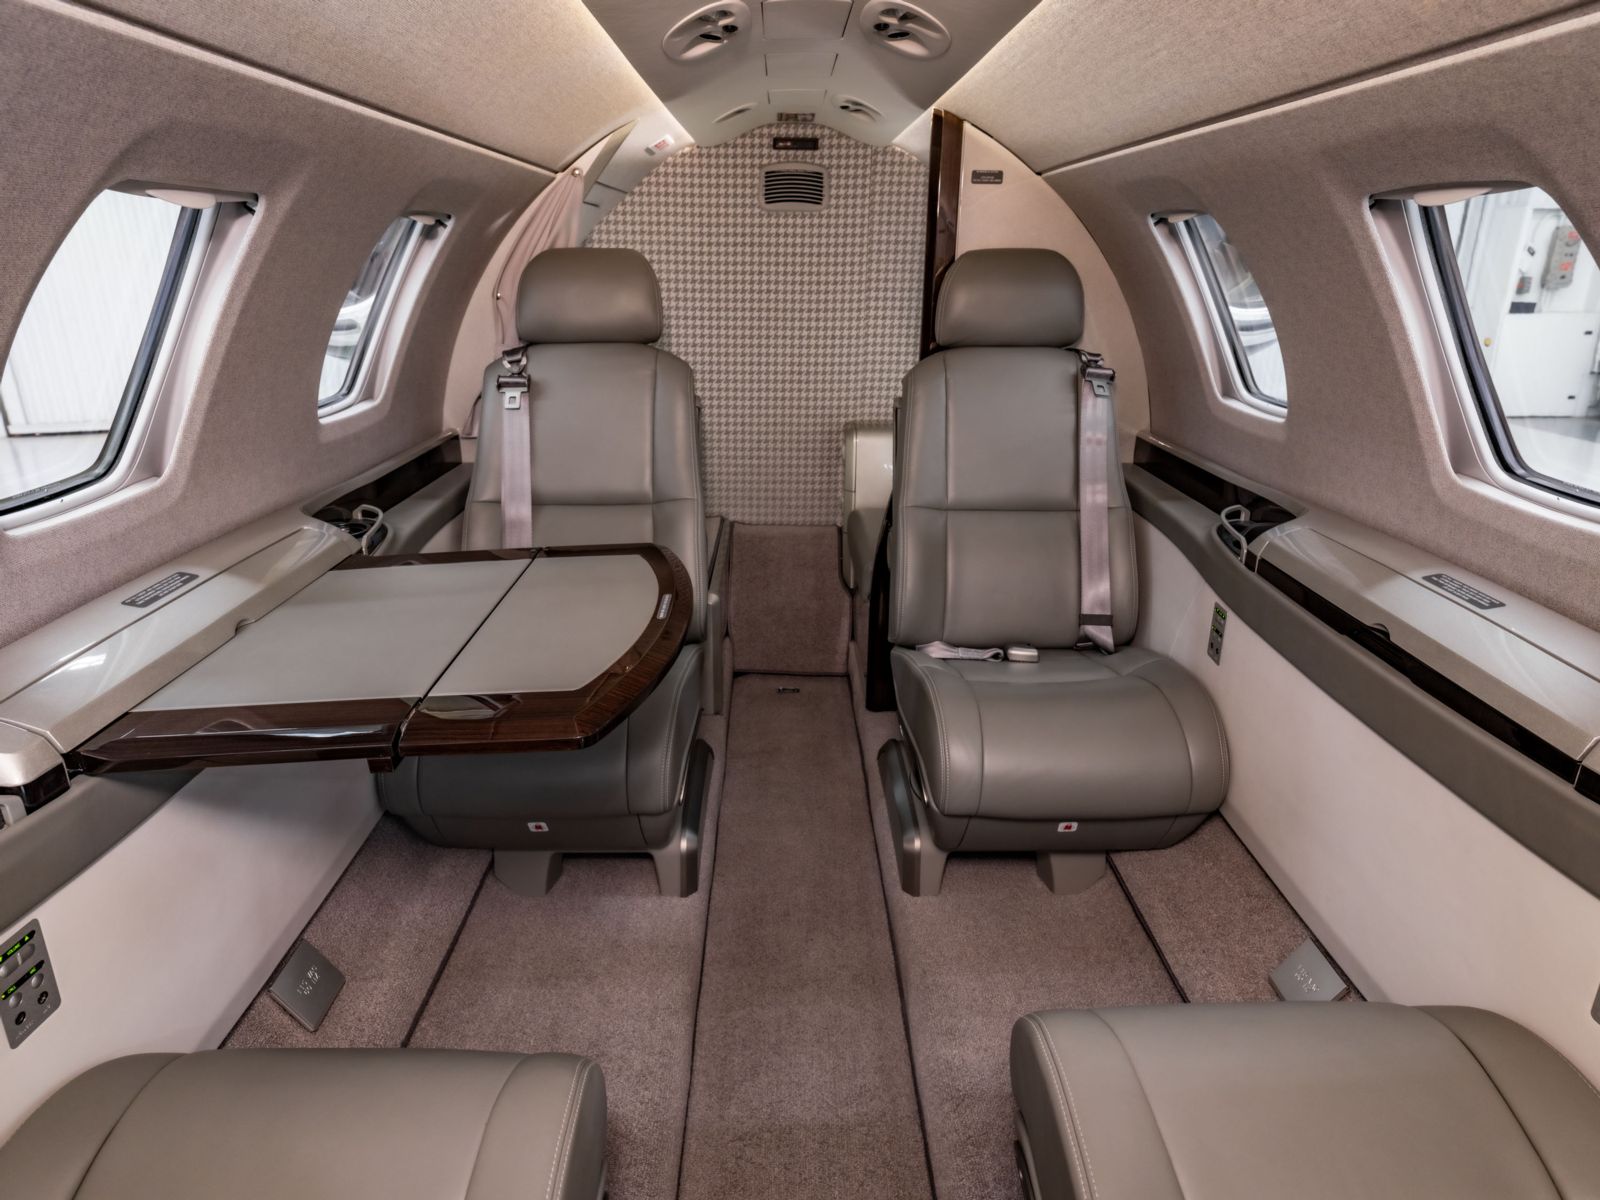 Cessna/Textron Citation M2  S/N 1107 for sale | gallery image: /userfiles/images/M2%201107/2022-03-08%2007_51_06.jpg